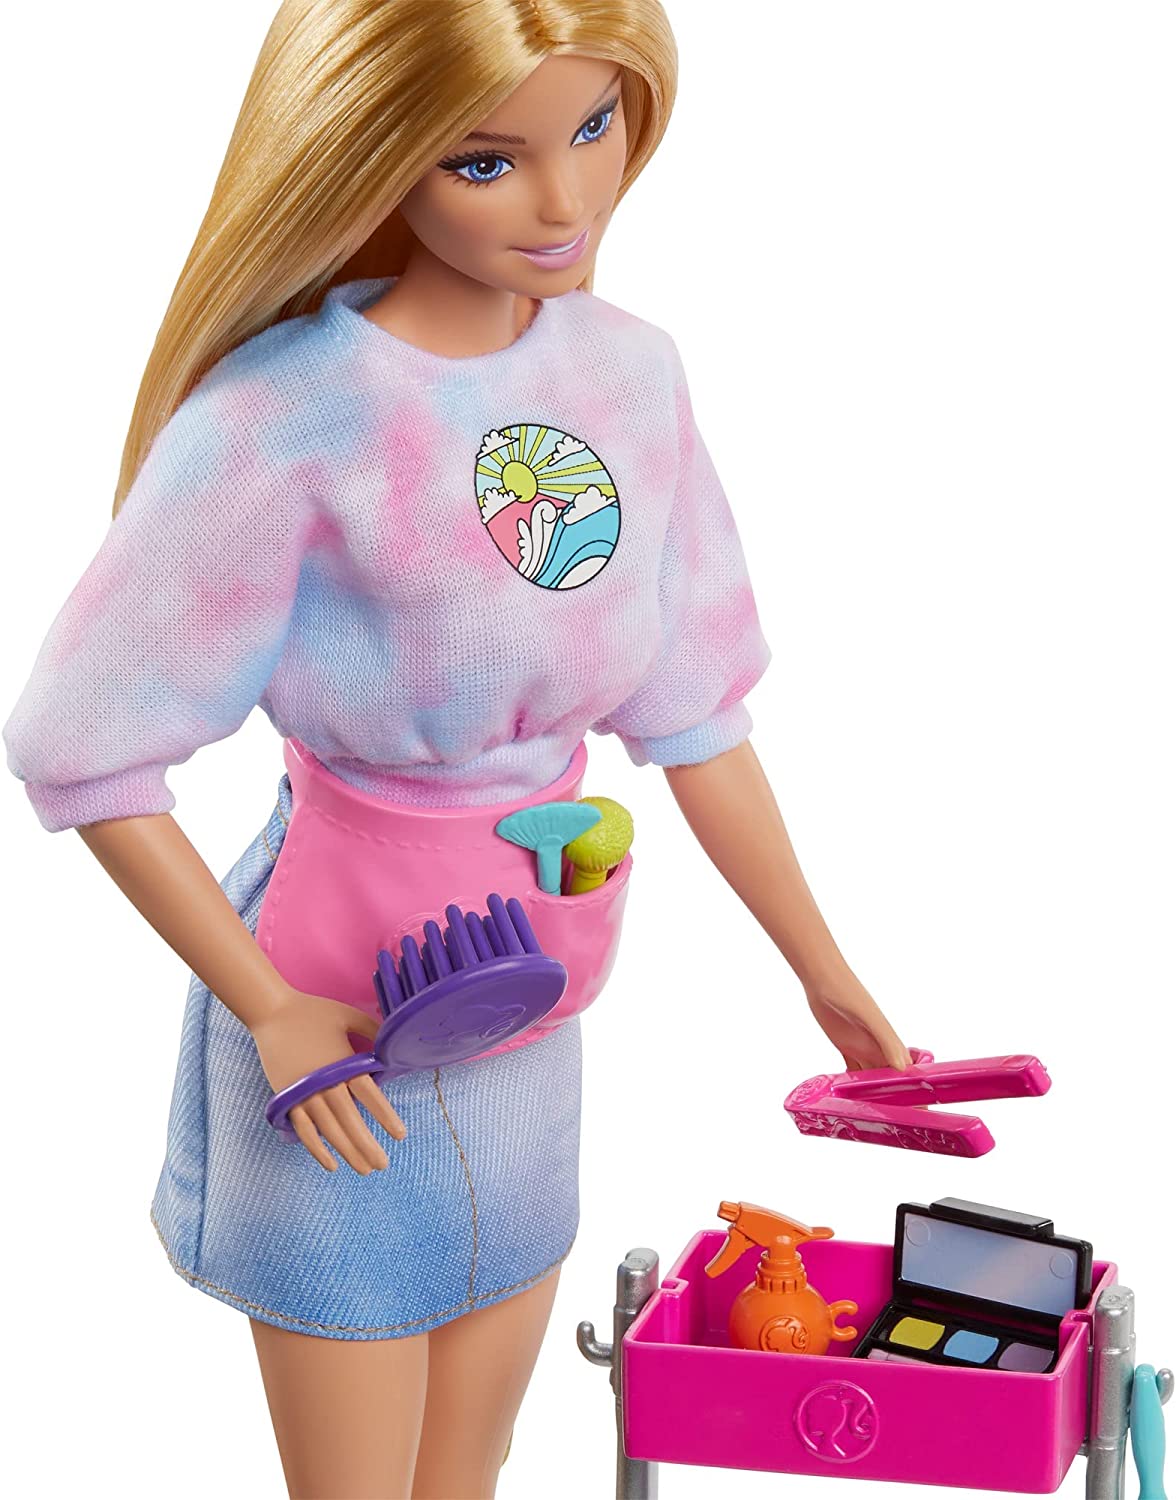 smykker At redigere Quagmire Barbie Stylist dolls with playsets 2023 - YouLoveIt.com